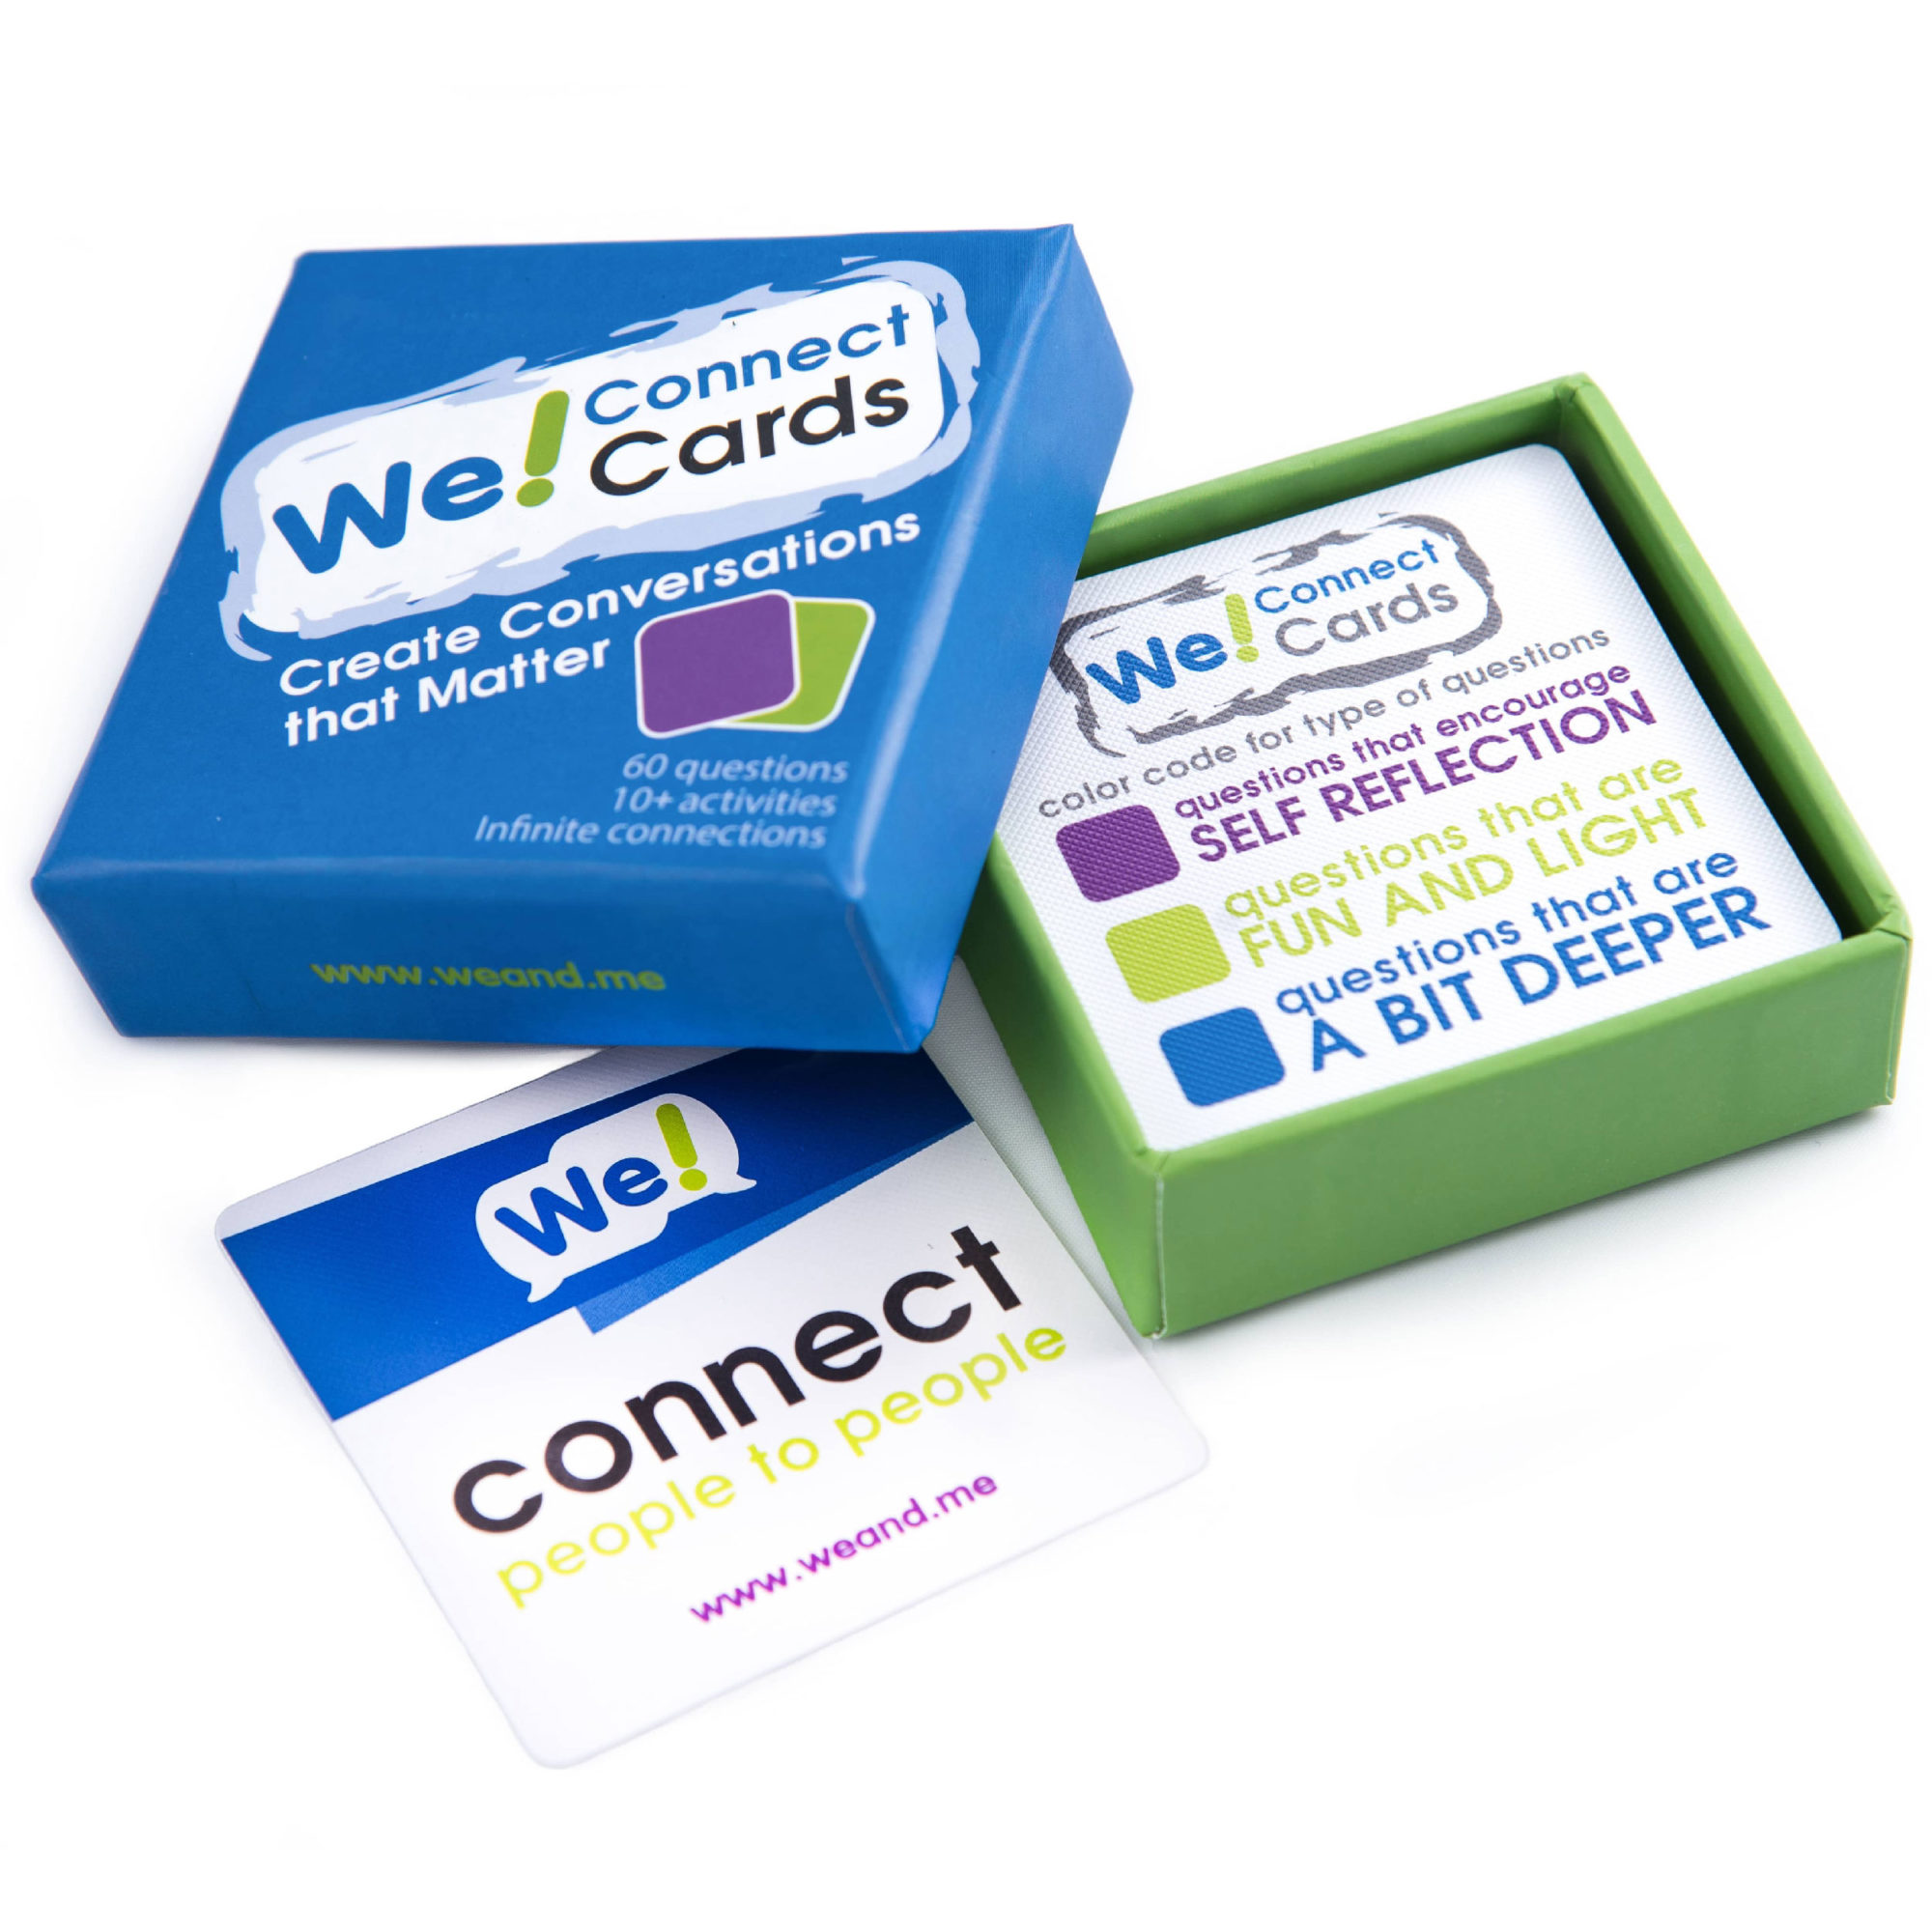 Connect карта. We connect. Connect Cards™.